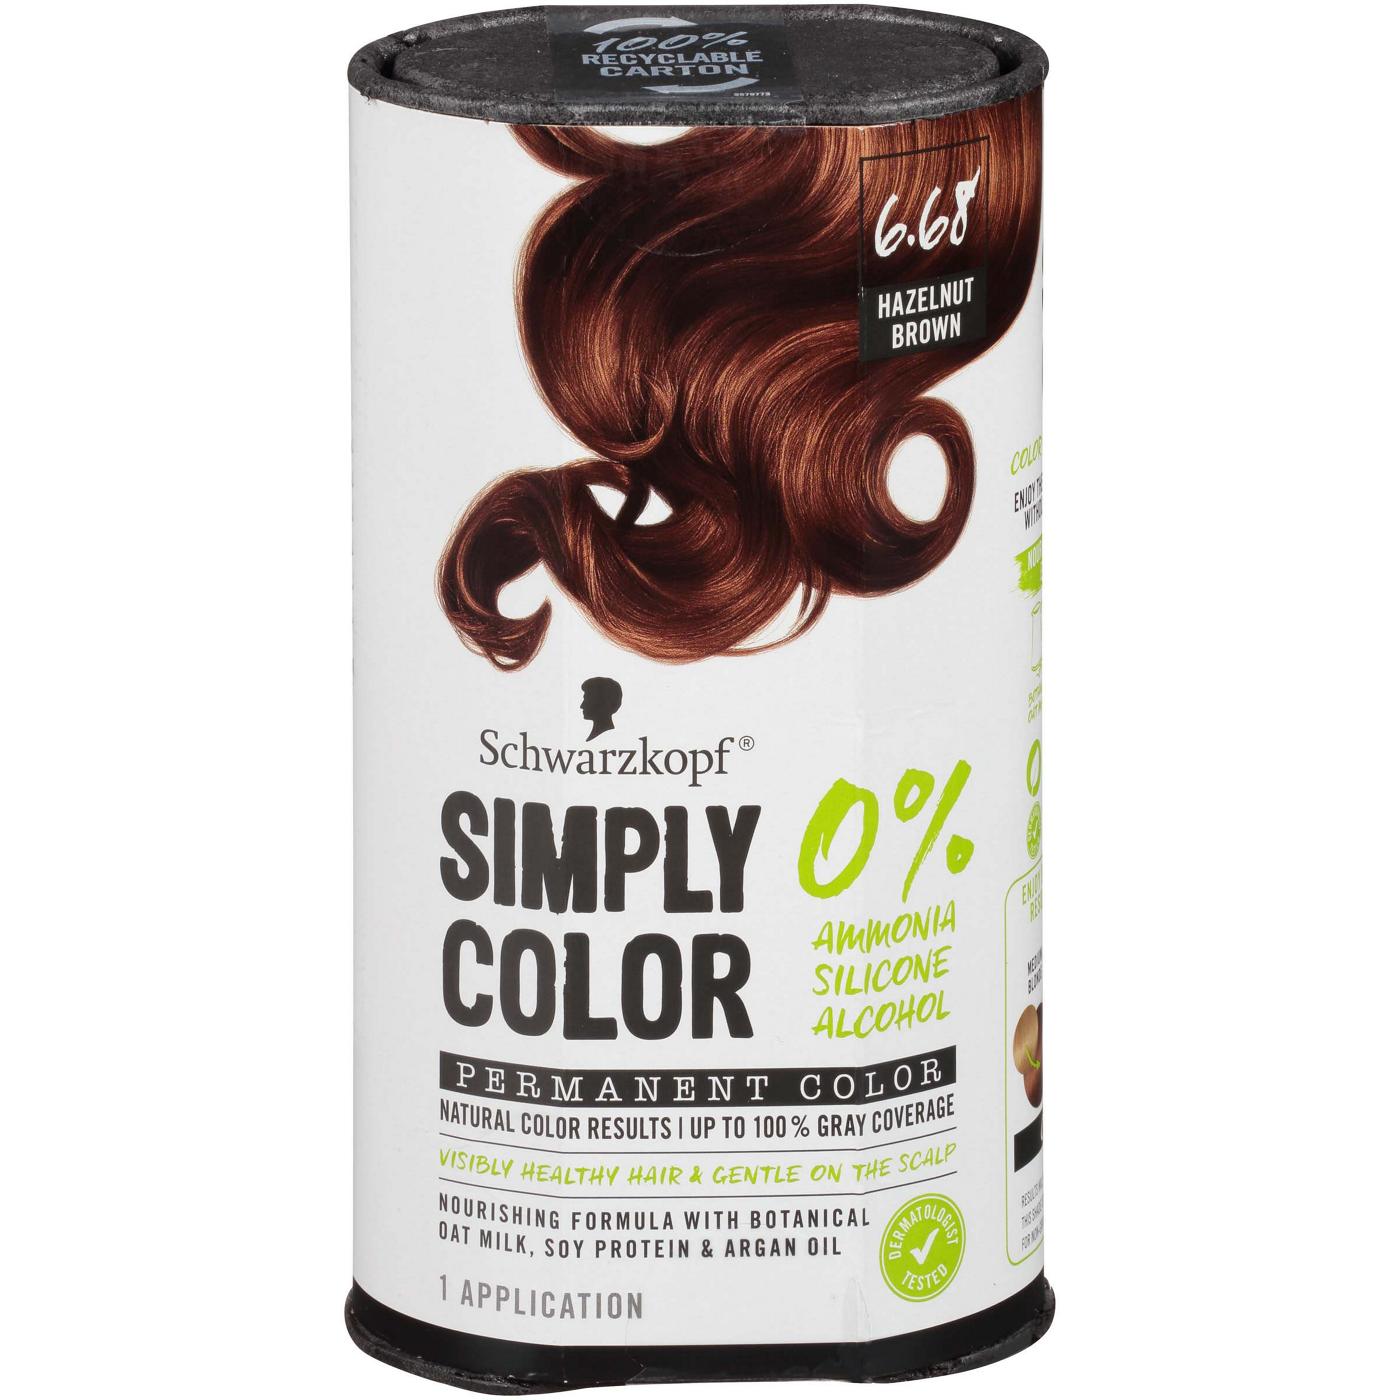 Schwarzkopf Simply Color Permanent Hair Color - 6.68 Hazelnut Brown; image 1 of 6